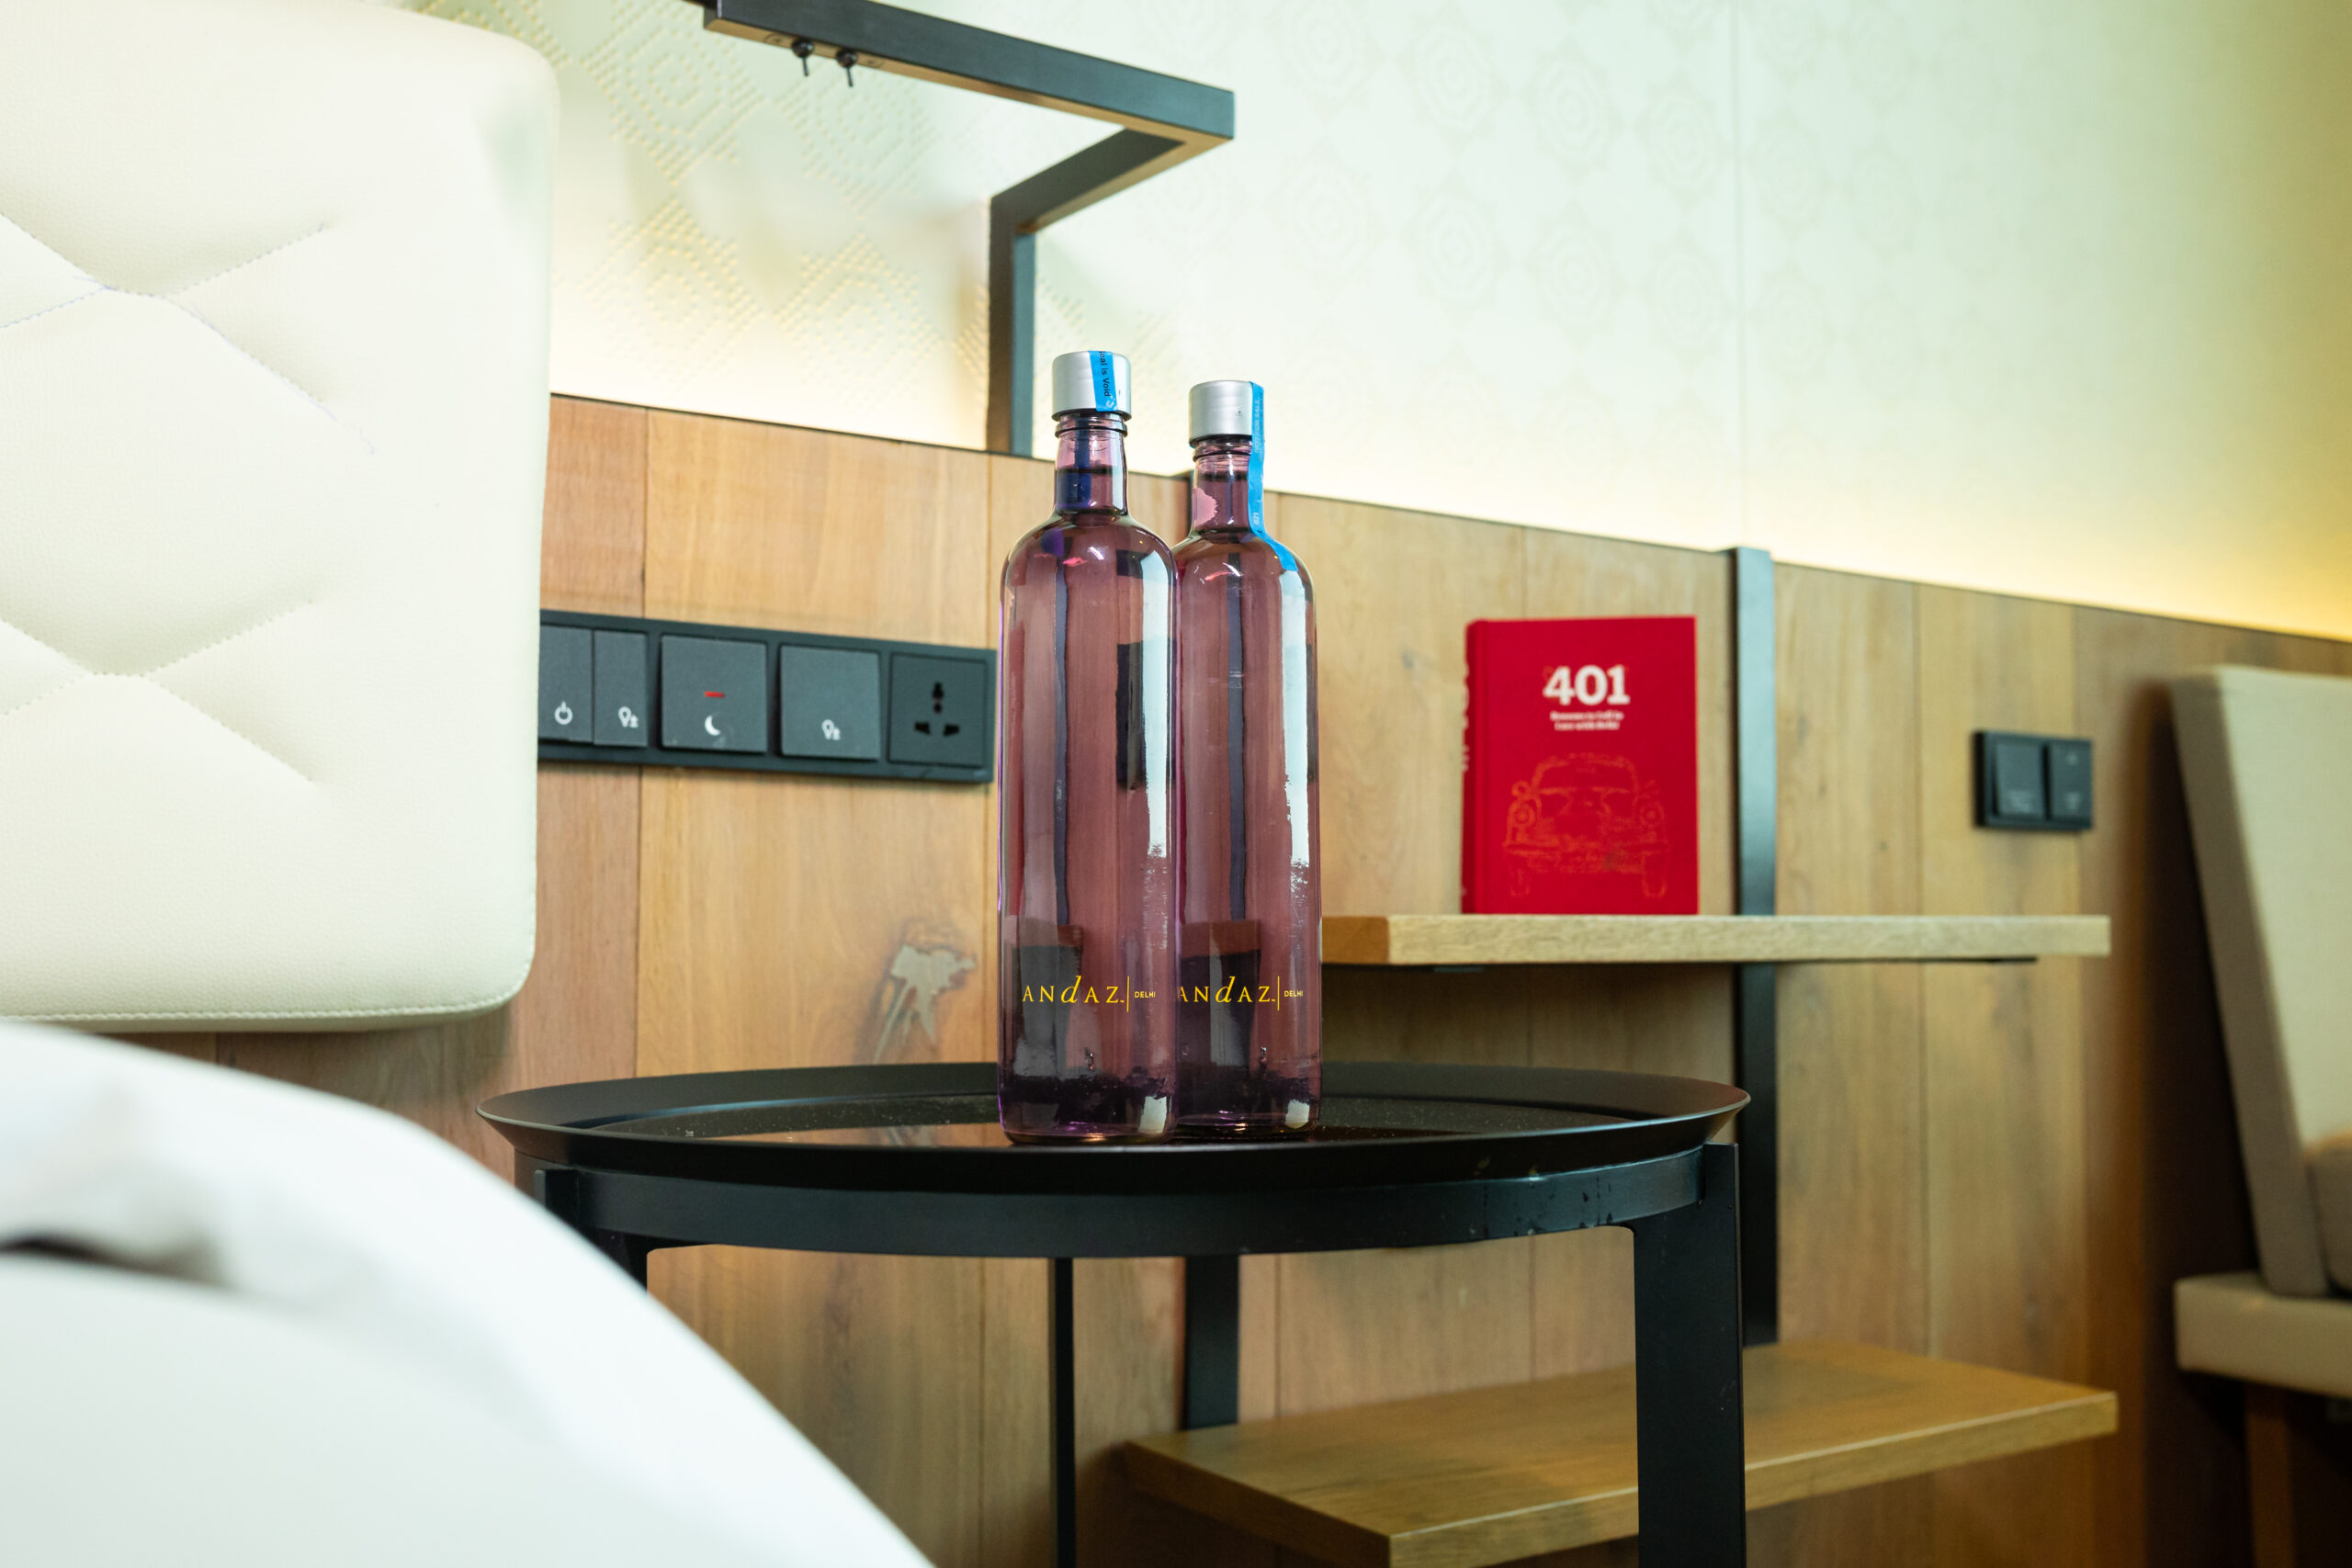 Andaz Hotel partners with Boon to eliminate single-use plastic to Provide a Sustainable Drinking Experience